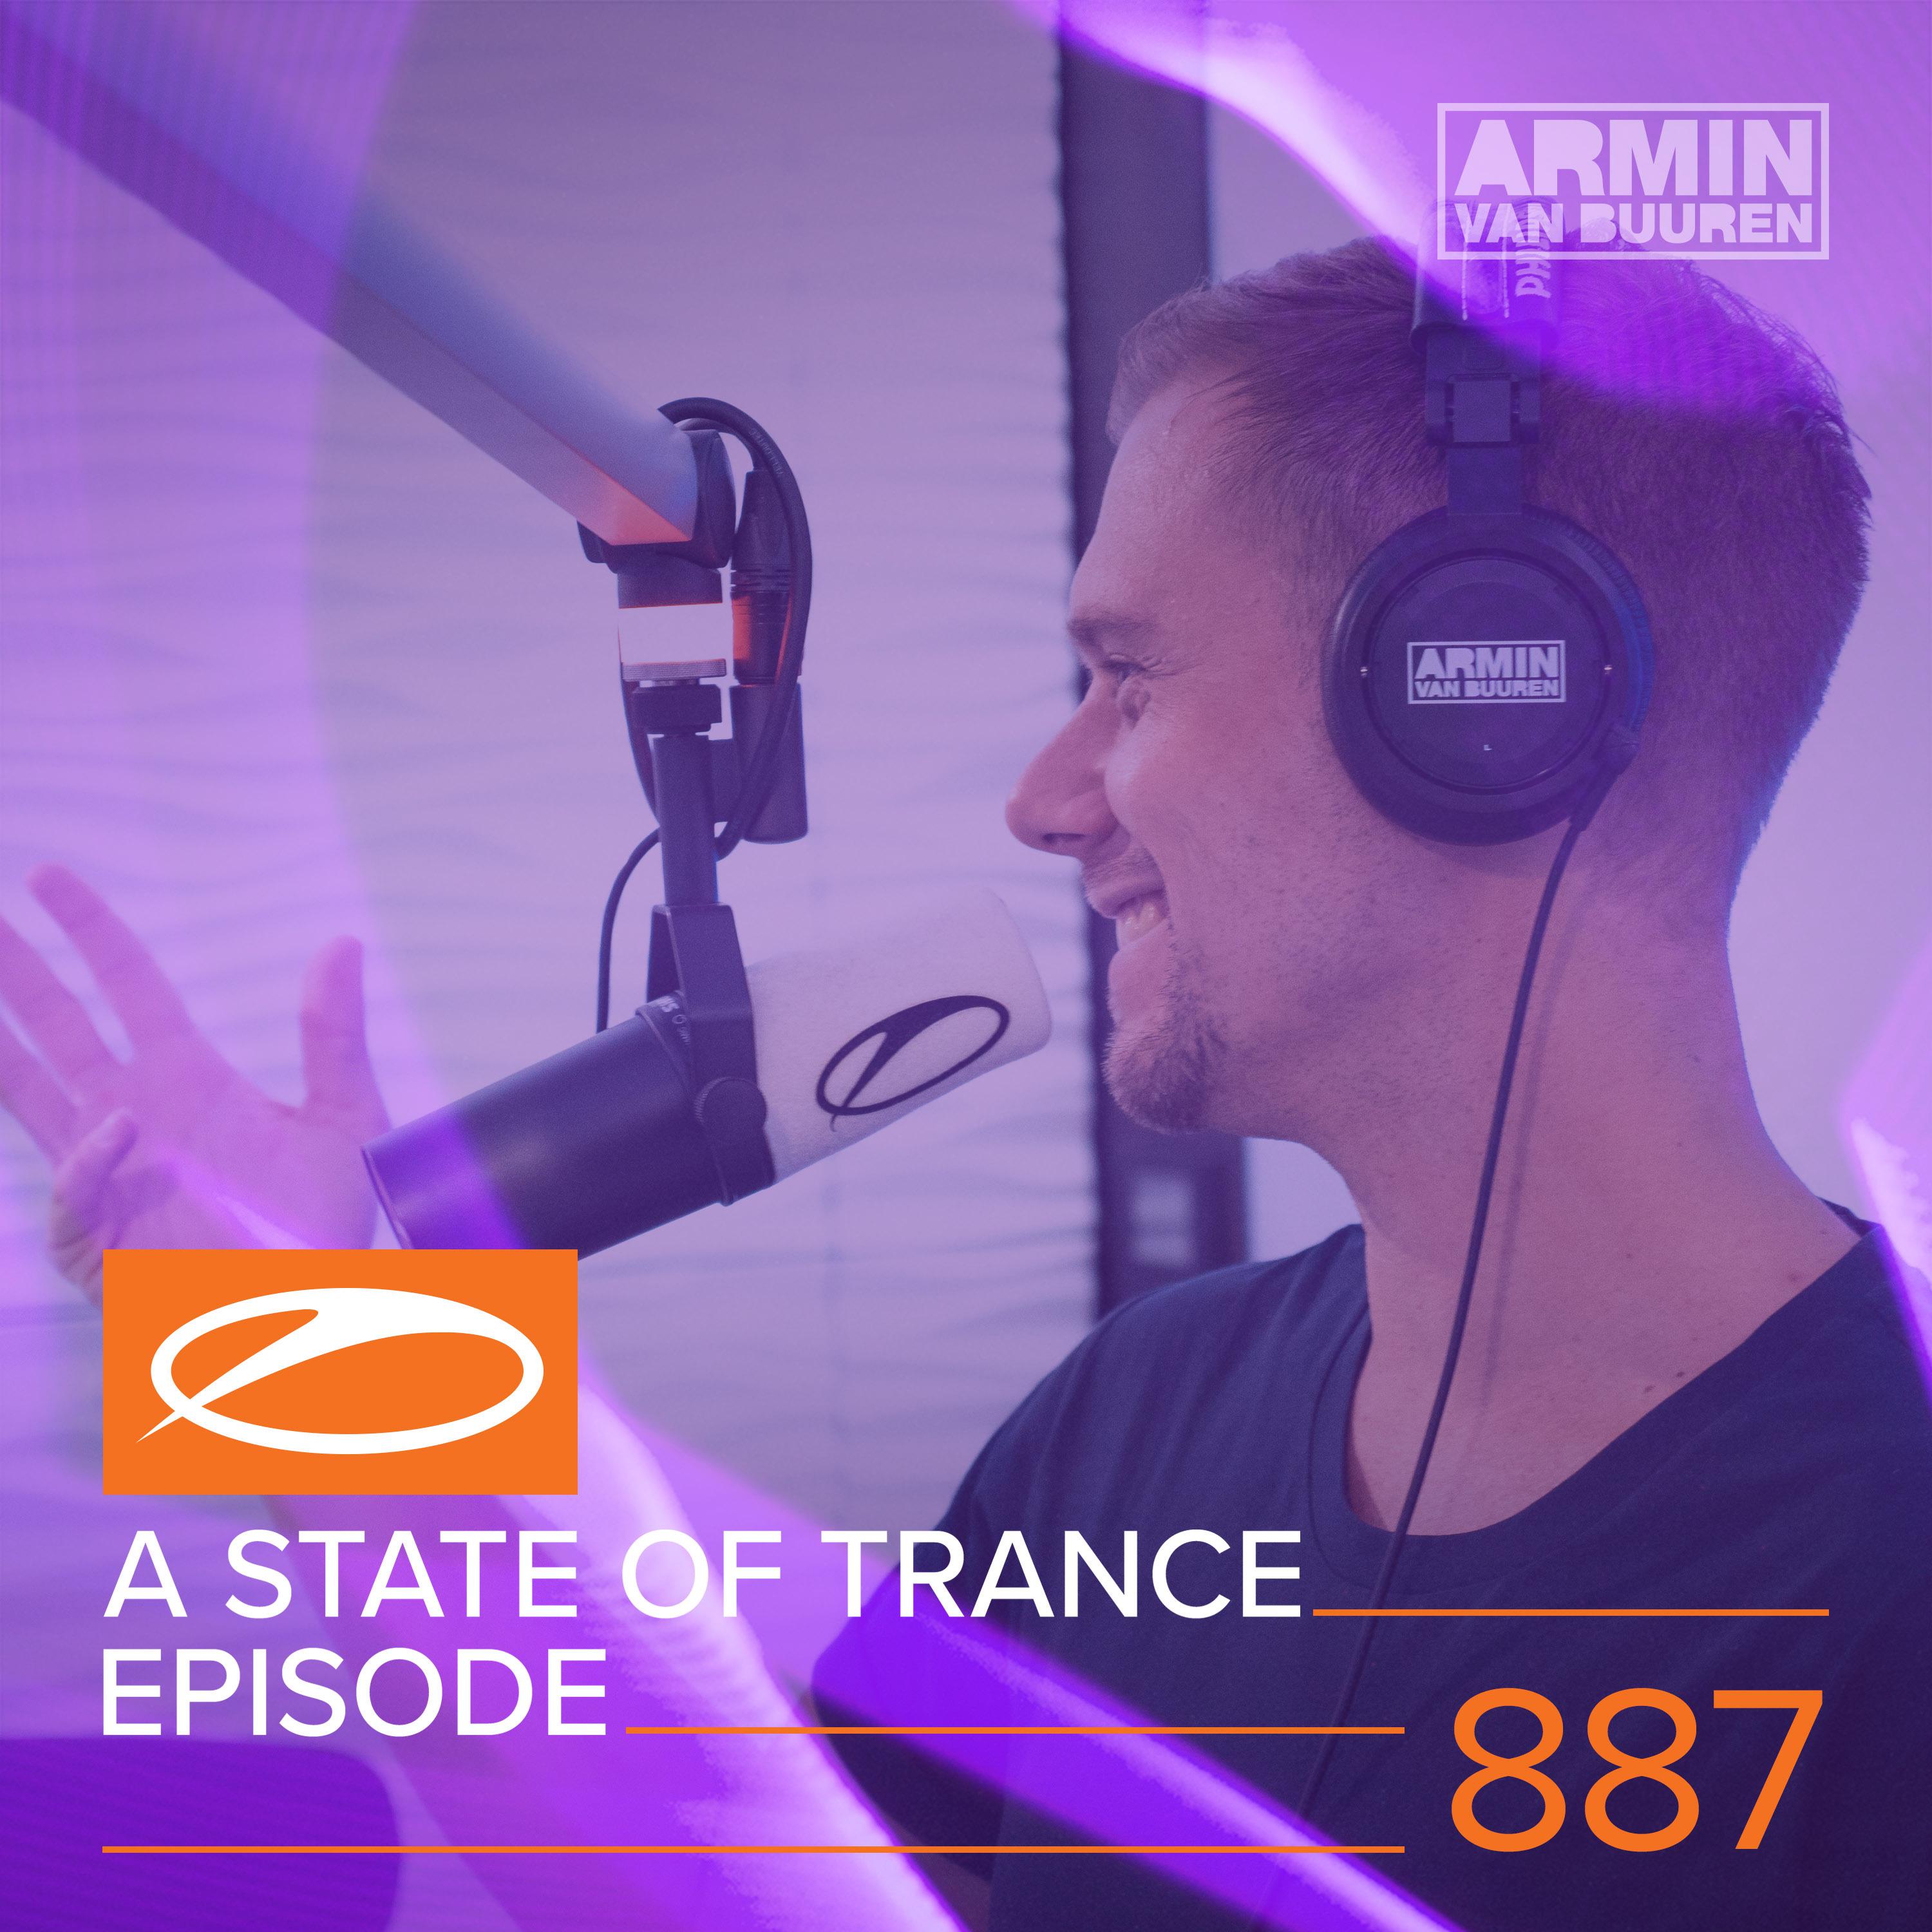 By My Side (ASOT 887) (Craig Connelly Remix)